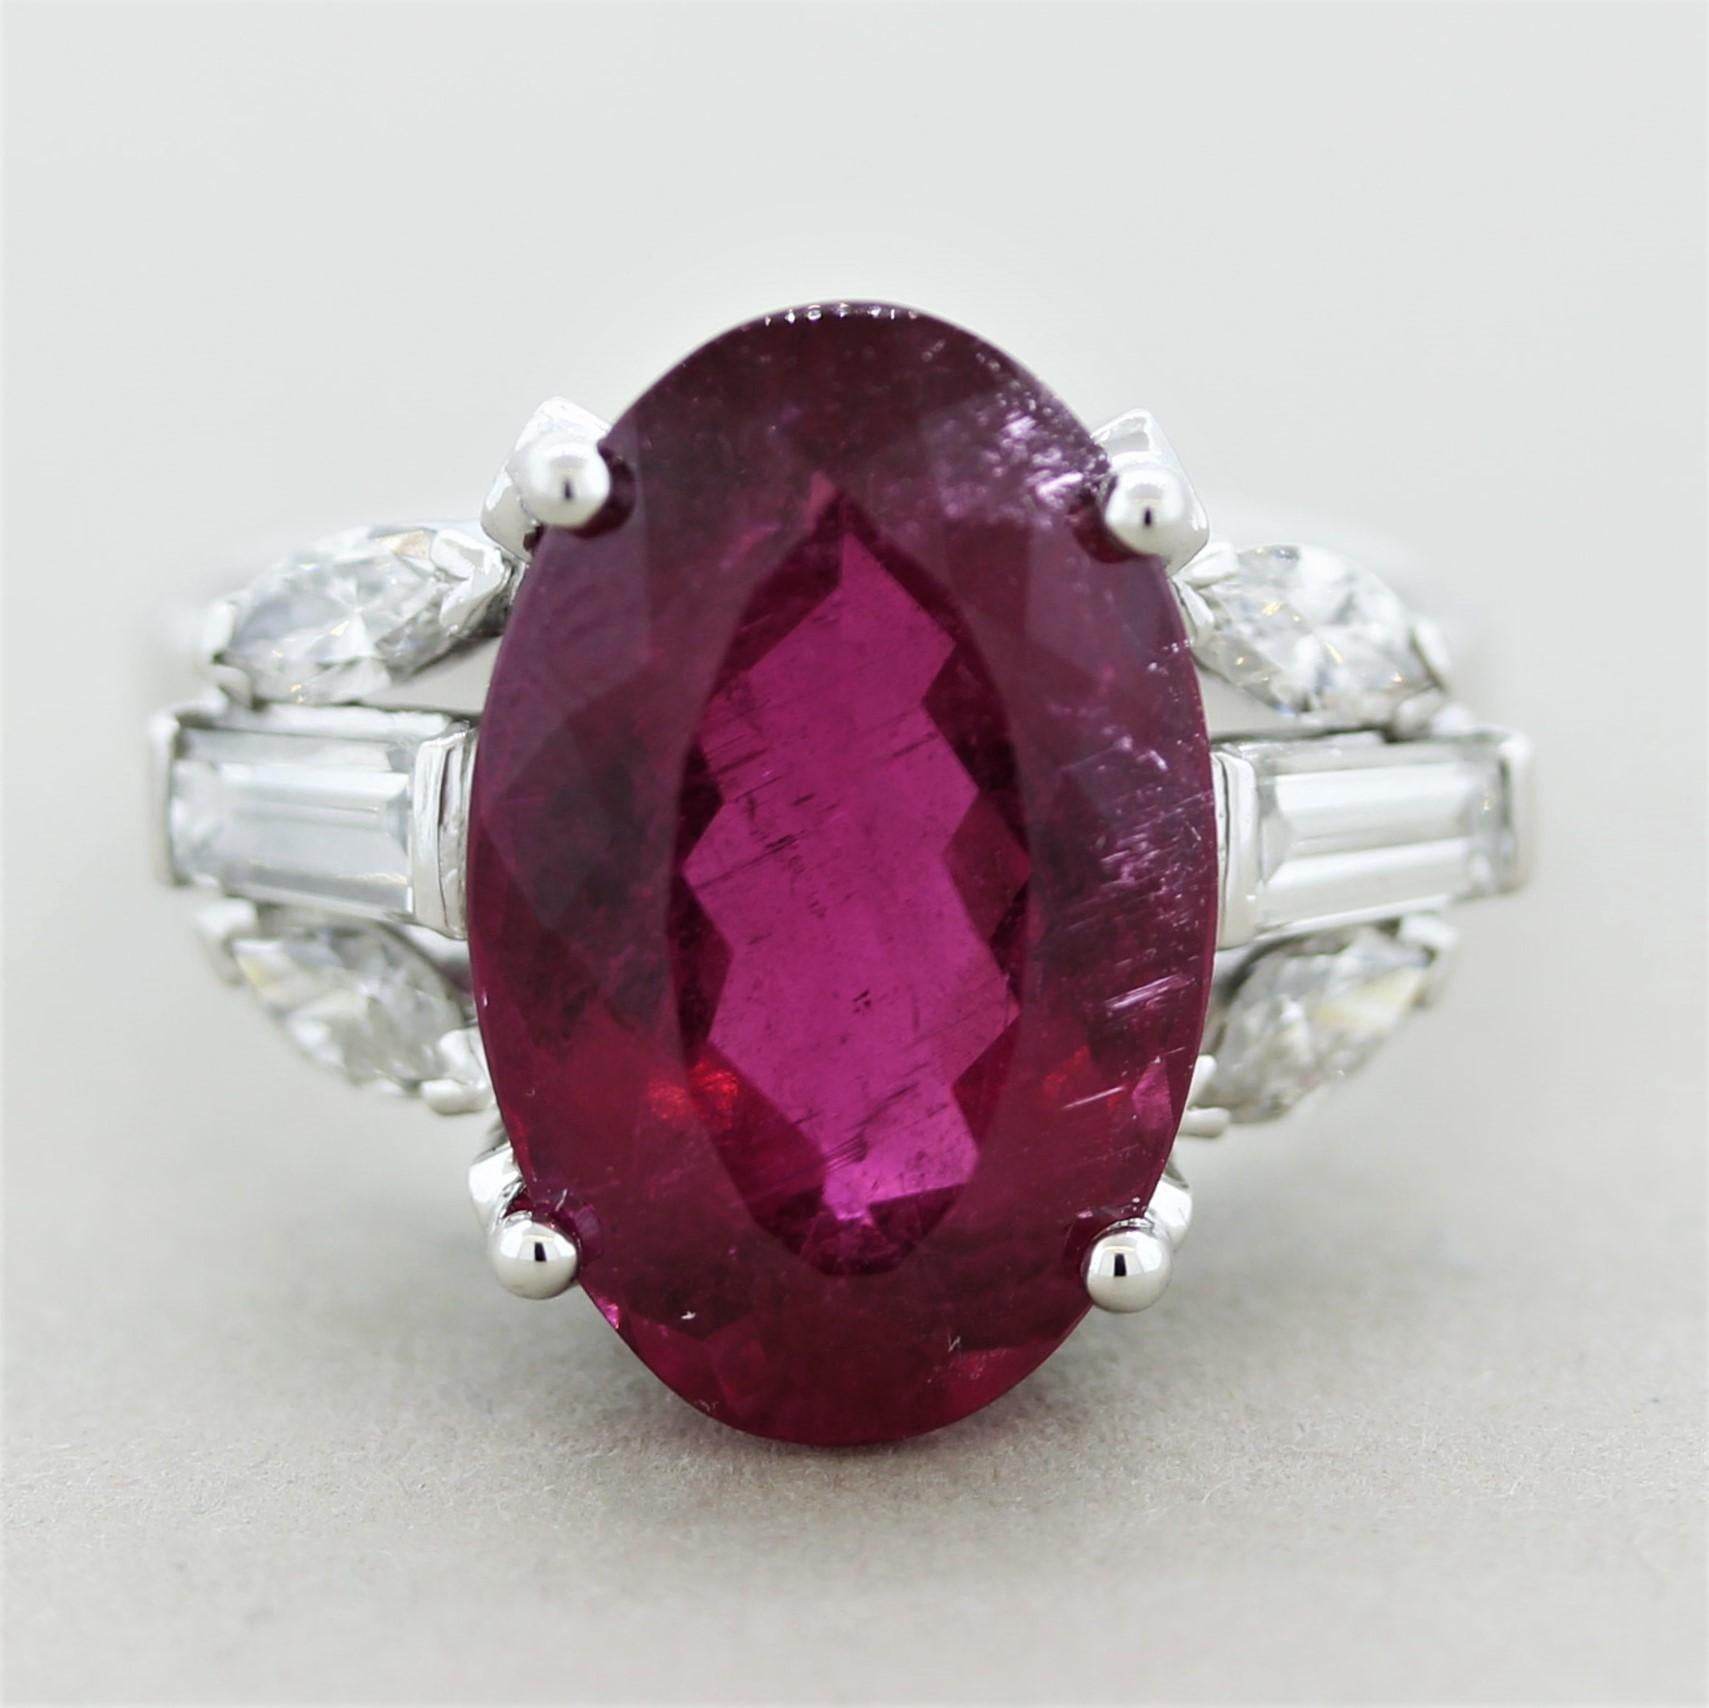 An intense raspberry red tourmaline weighing 9.17 carats takes center stage! Known in the trade as “rubellite” for its red ruby like color, it is a top-quality tourmaline. It is accented by 6 large diamonds set on its sides, 4 marquise-shape and 2